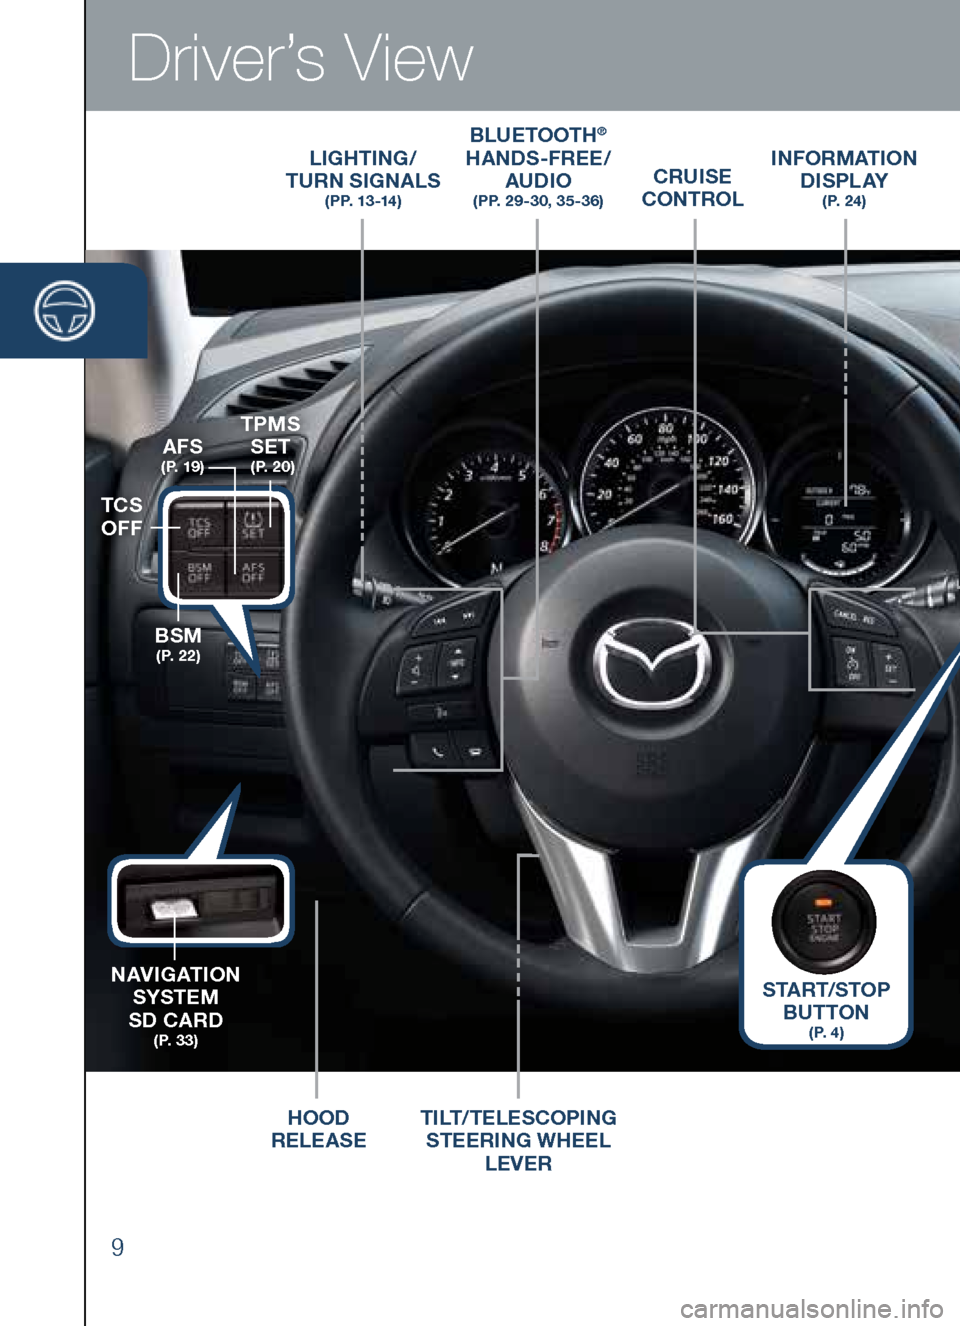 MAZDA MODEL CX-5 2014  Smart Start Guide (in English) Driver’s View
9
LIGHTING/  
TURN SIGNALS  
( P P.  1 3 -14 )
bLUETOOTH®  
HANDS-FREE/  
A UDIO  
 (PP. 29-30, 35 -36)
INFORMATION 
D I S P L AY  
( P.  2 4 )
HOOD 
RELEASE TILT
/TELESCOPING  
STEER